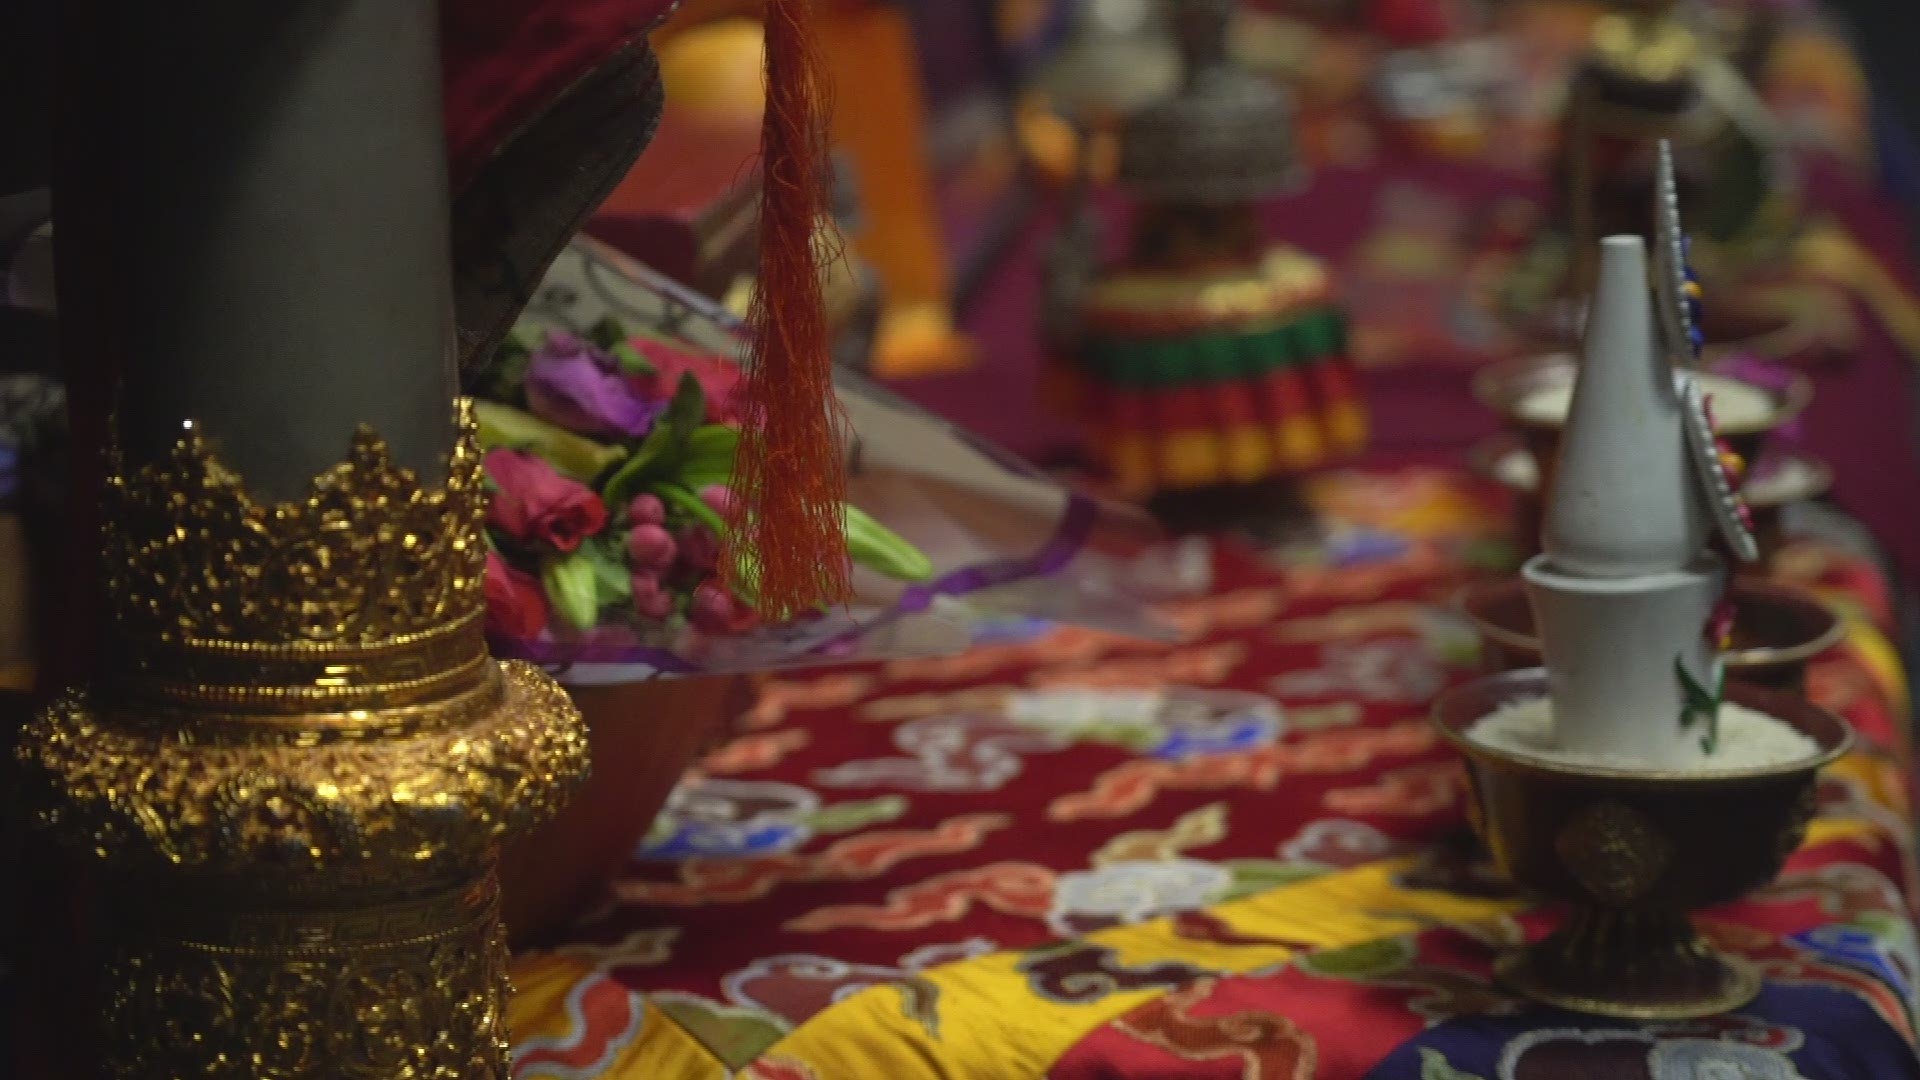 A group of Tibetan monks visited Lyon College in Batesville to perform a Mandala sand painting ceremony.